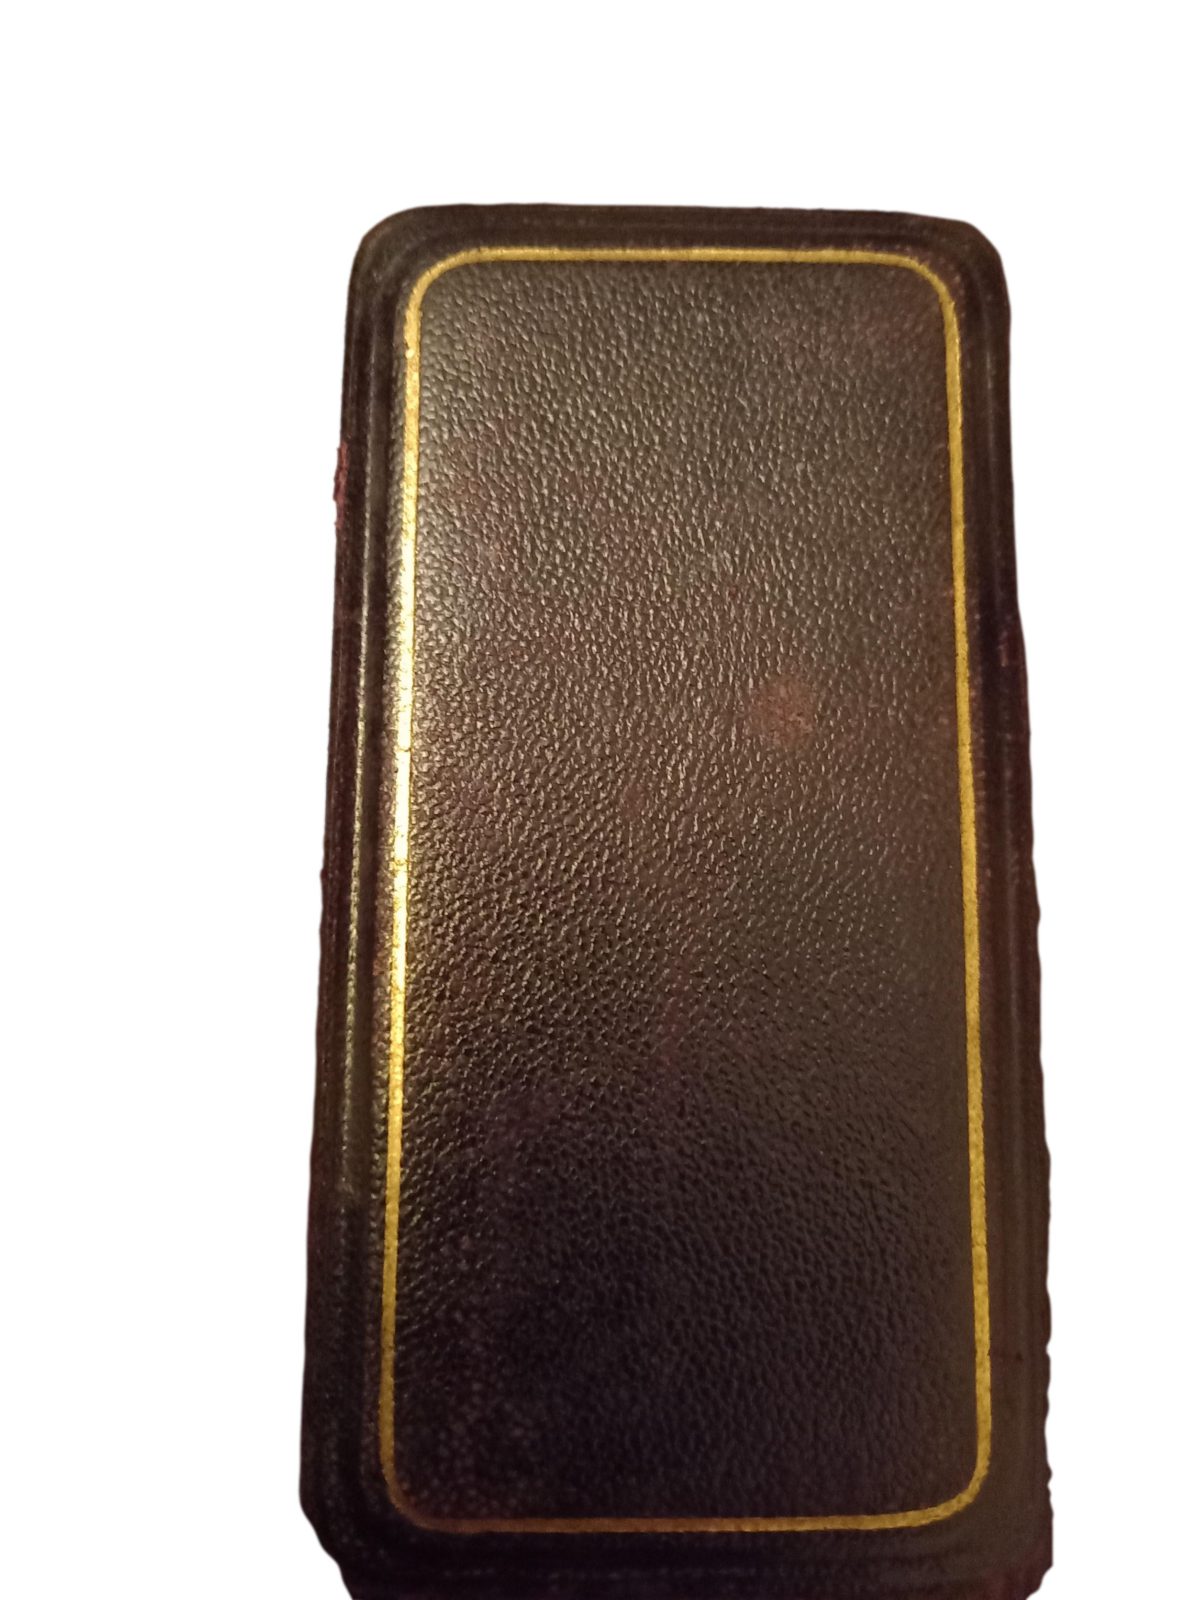 Hallmarked Birmingham 1891. Inscribed " June 1891. Whingate Sunday school. Opened by Tho"s Ritson Esq." In fitted case perfect condition Photo of closed case.